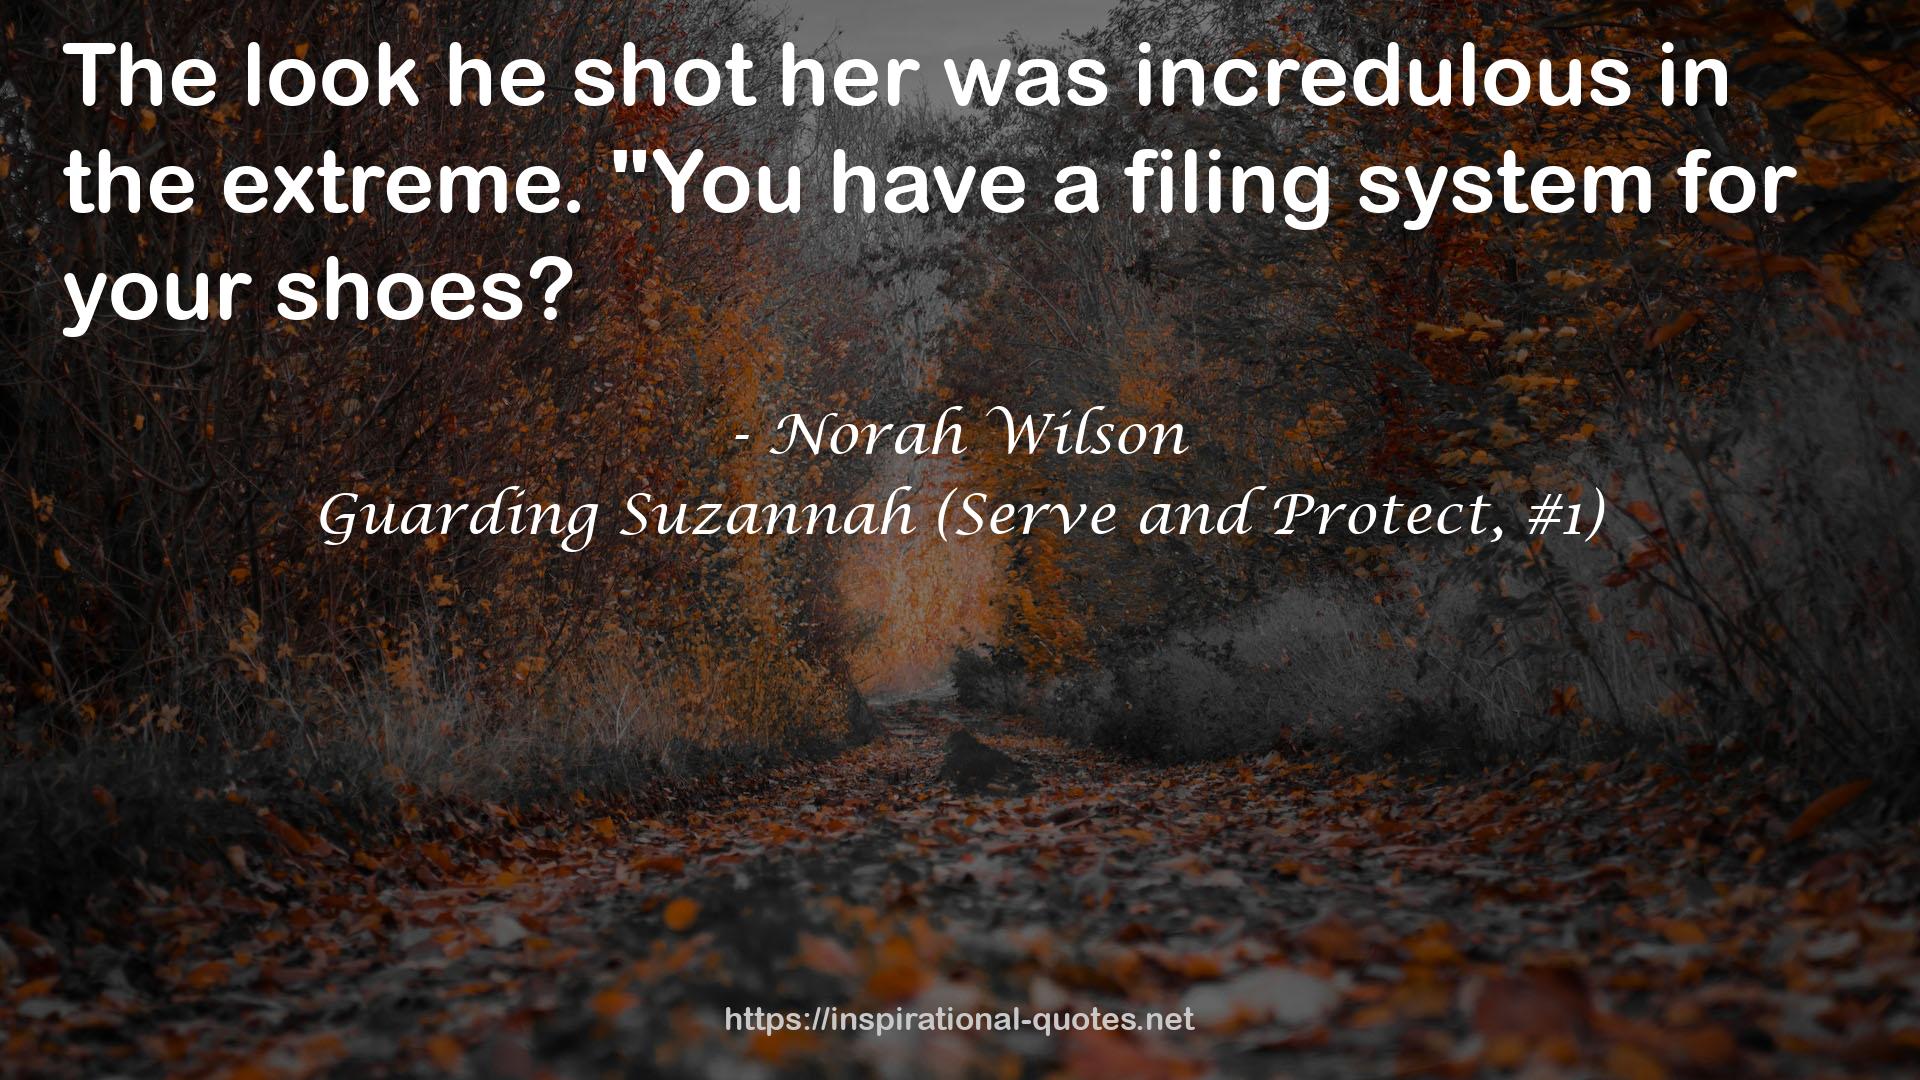 Guarding Suzannah (Serve and Protect, #1) QUOTES